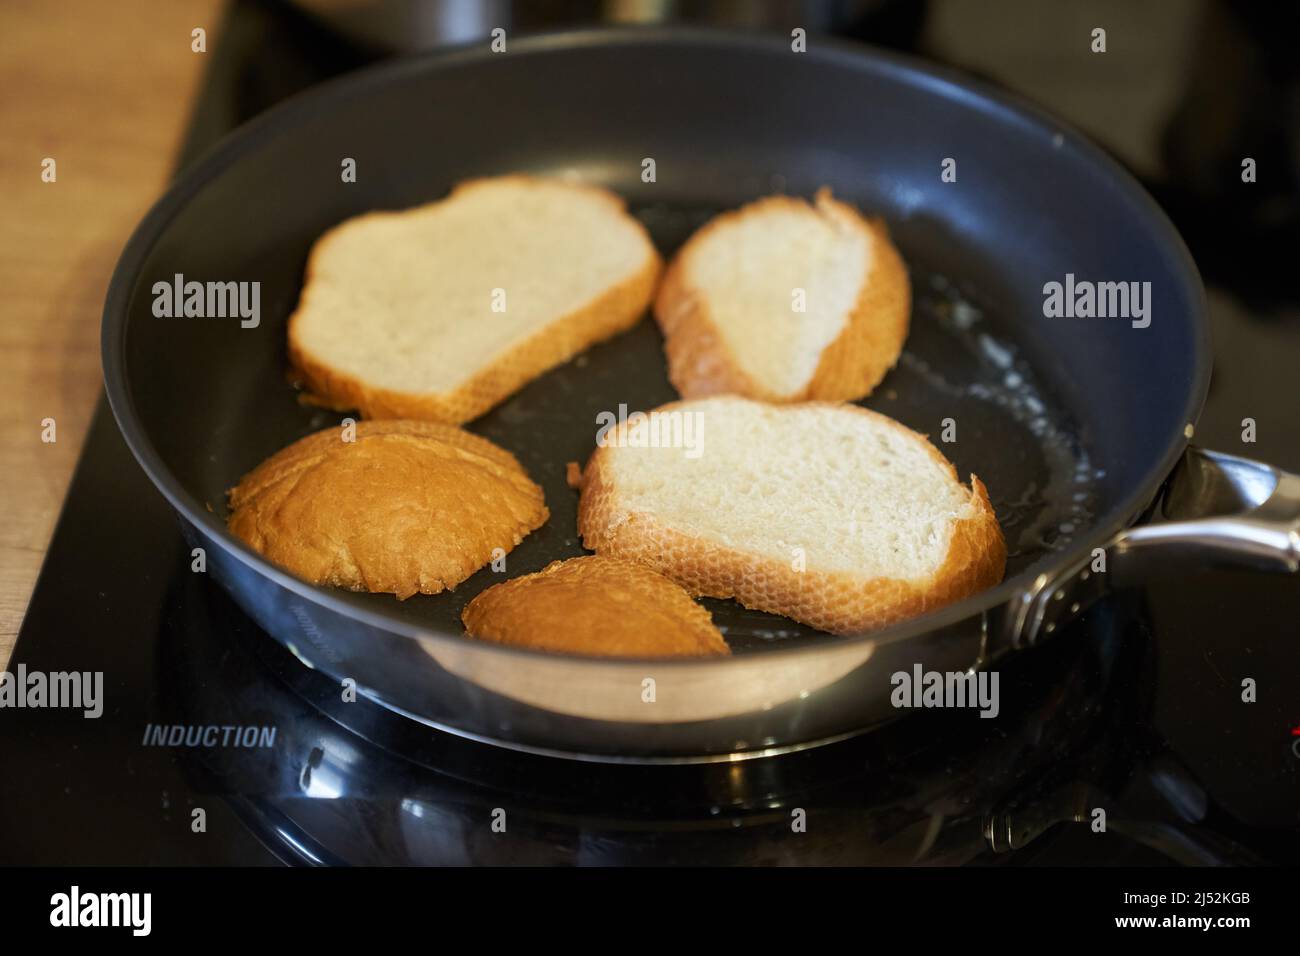 Delicious fried bread in a frying pan. Hot homemade sandwich step-by-step preparation. High quality photo Stock Photo